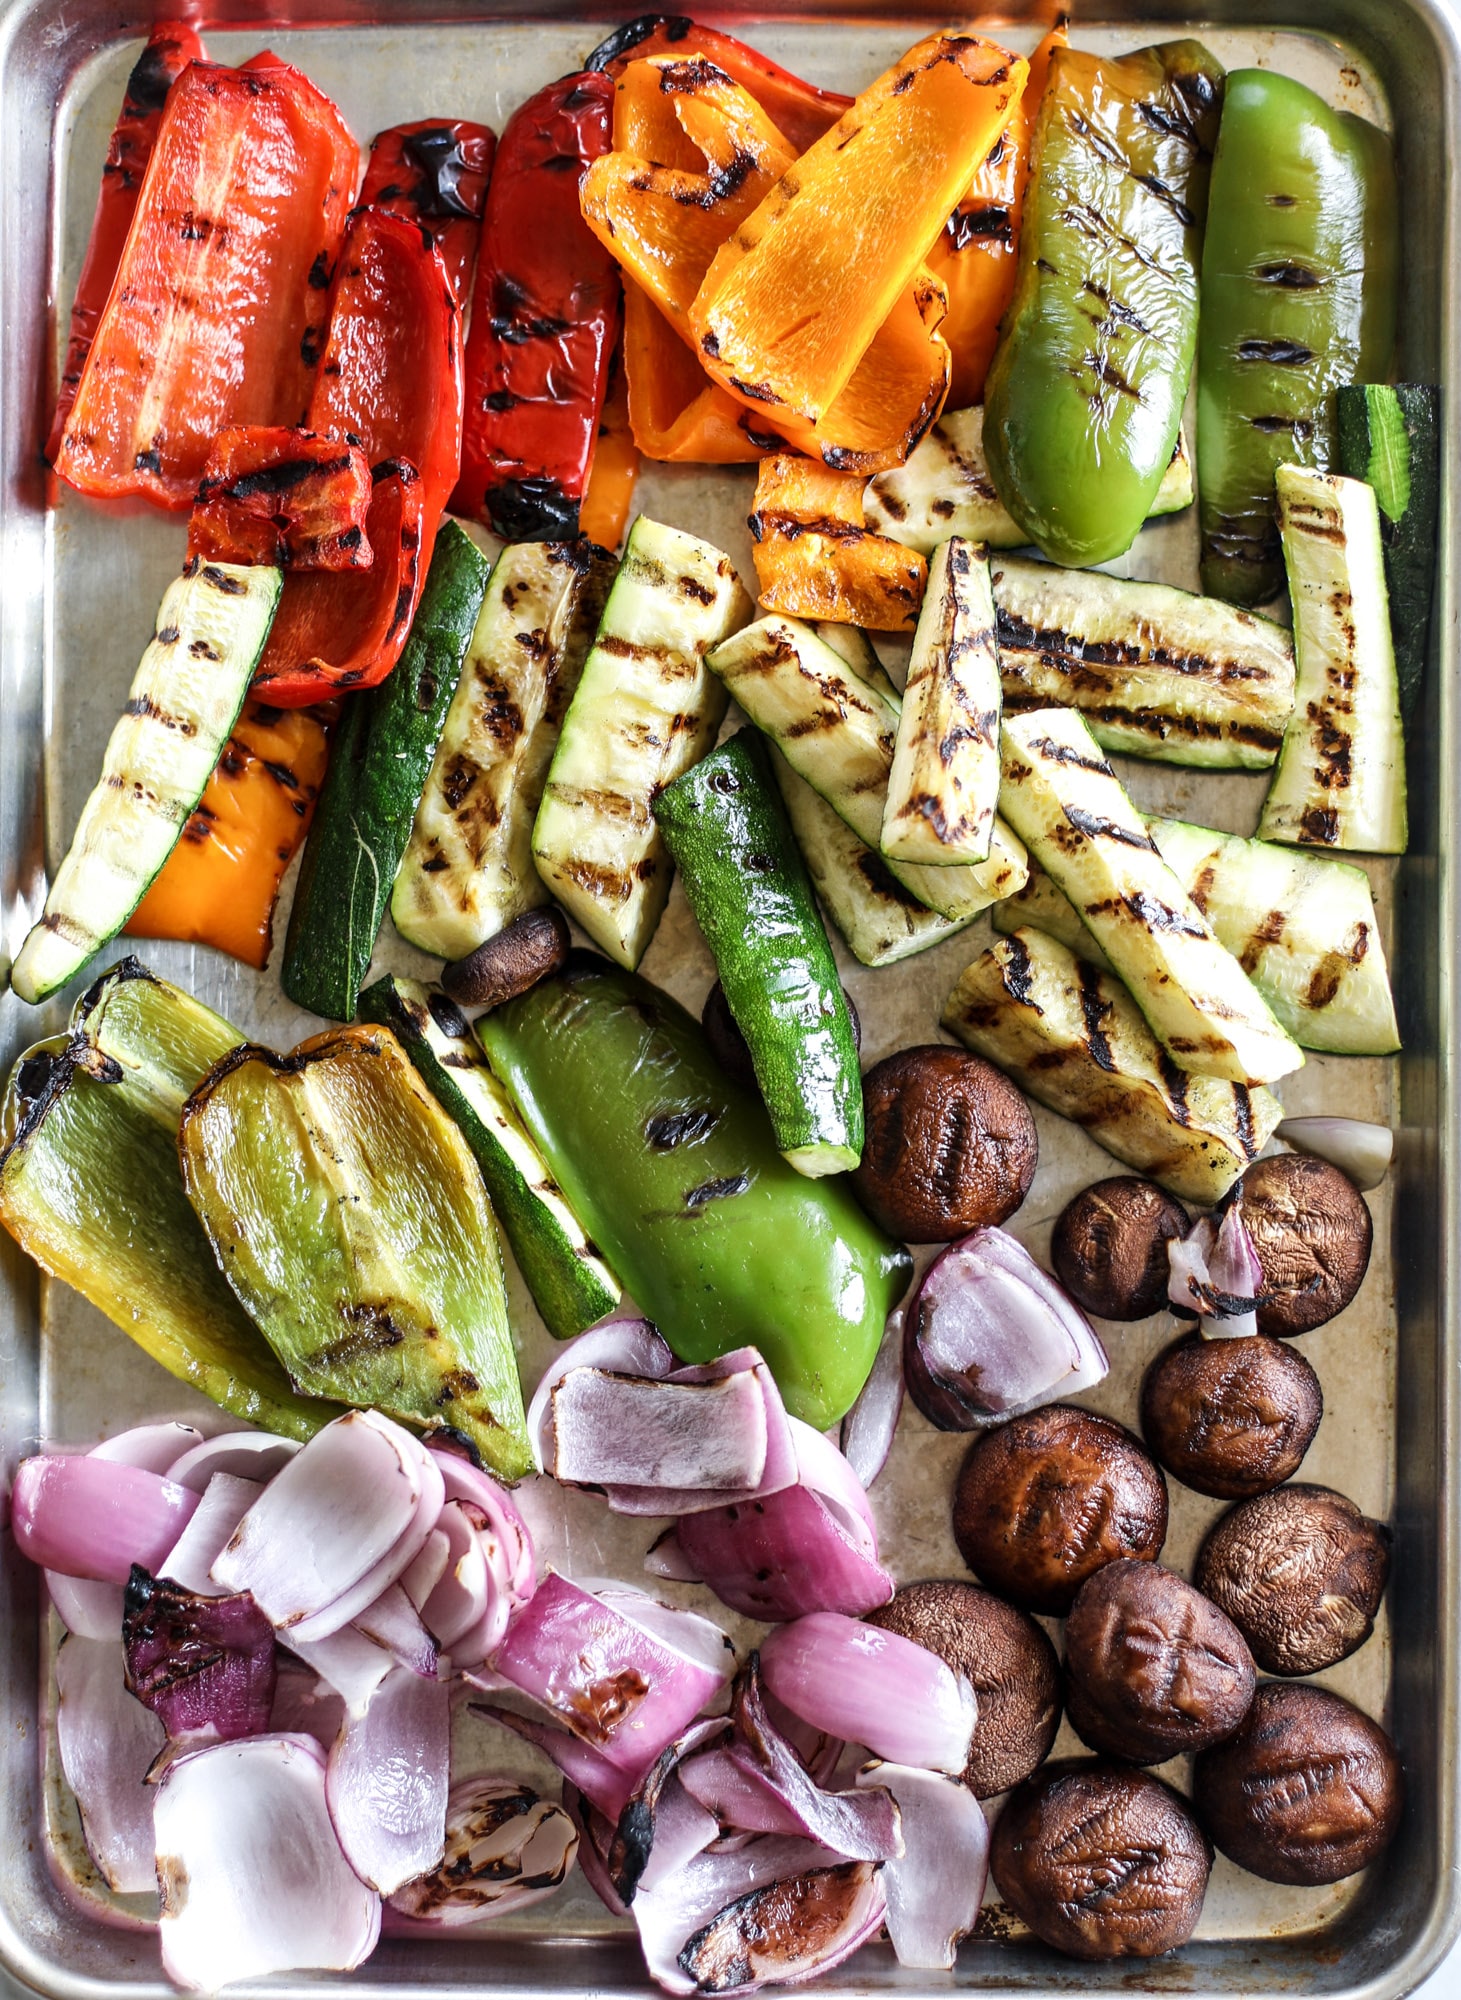 These are the best grilled vegetables ever! You grill your veggies and chop them into the perfect bite, then drizzle them with a fabulous fresh basil vinaigrette. Delish! It doesn't end there; serve these with grilled garlic toast and everyone will freak! I howsweeteats.com #best #grilled #vegetables #veggies #basil #bread